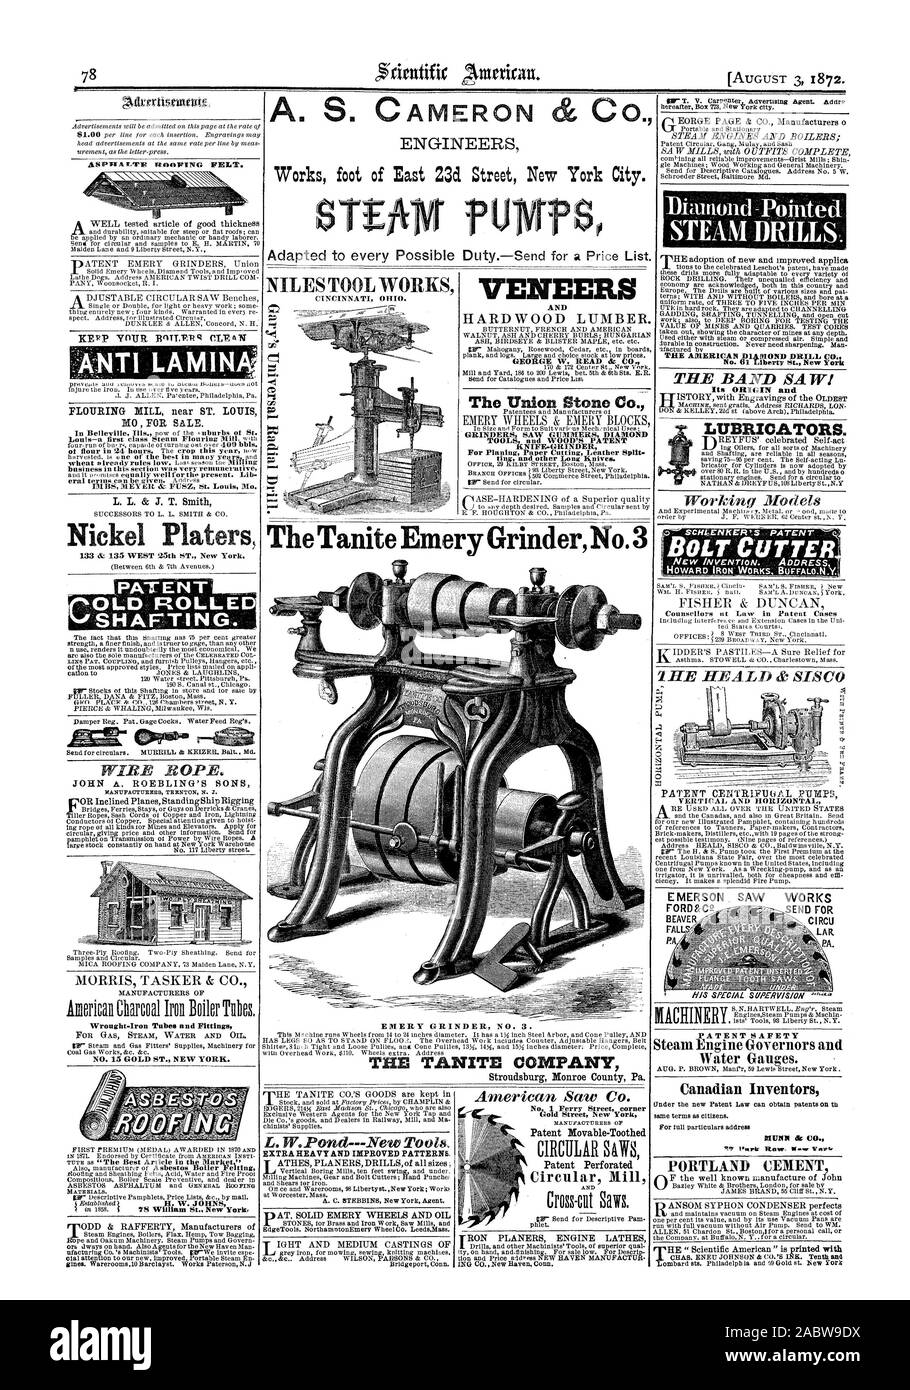 S. CAMERON AND GEORGE W. READ au CO. The Union Stone Co. TOOLS and WOOD'S PATENT KNIFE-GRINDER For Planing Paper Cutting Leather Split VENEERS EMERY GRINDER NO. 3. THE TA.NITE COMPANY L. L. & J. T. Smith Nickel Platers PATENT (SOLD ROLLED Nio SHAFTING. WIRE ROPE. Wrought-Iron Tubes and Fittings NO. 15 GOLD ST. NEW YORK. STEANI 1)RILLS. THE AMERICAN DIAMOND DRILL C THE BAND SA WI Its ORIGIN and Working Models BOLT CUTTER' Counsellors at Law in Patent Cases 72 PATENT SAFETY The Tanite Emery Grinder No. 3 L.W.Pond.New Tools. EXTRA HEAVY AND IMPROVED PATTERNS American Saw Co. Patent Movable- Stock Photo